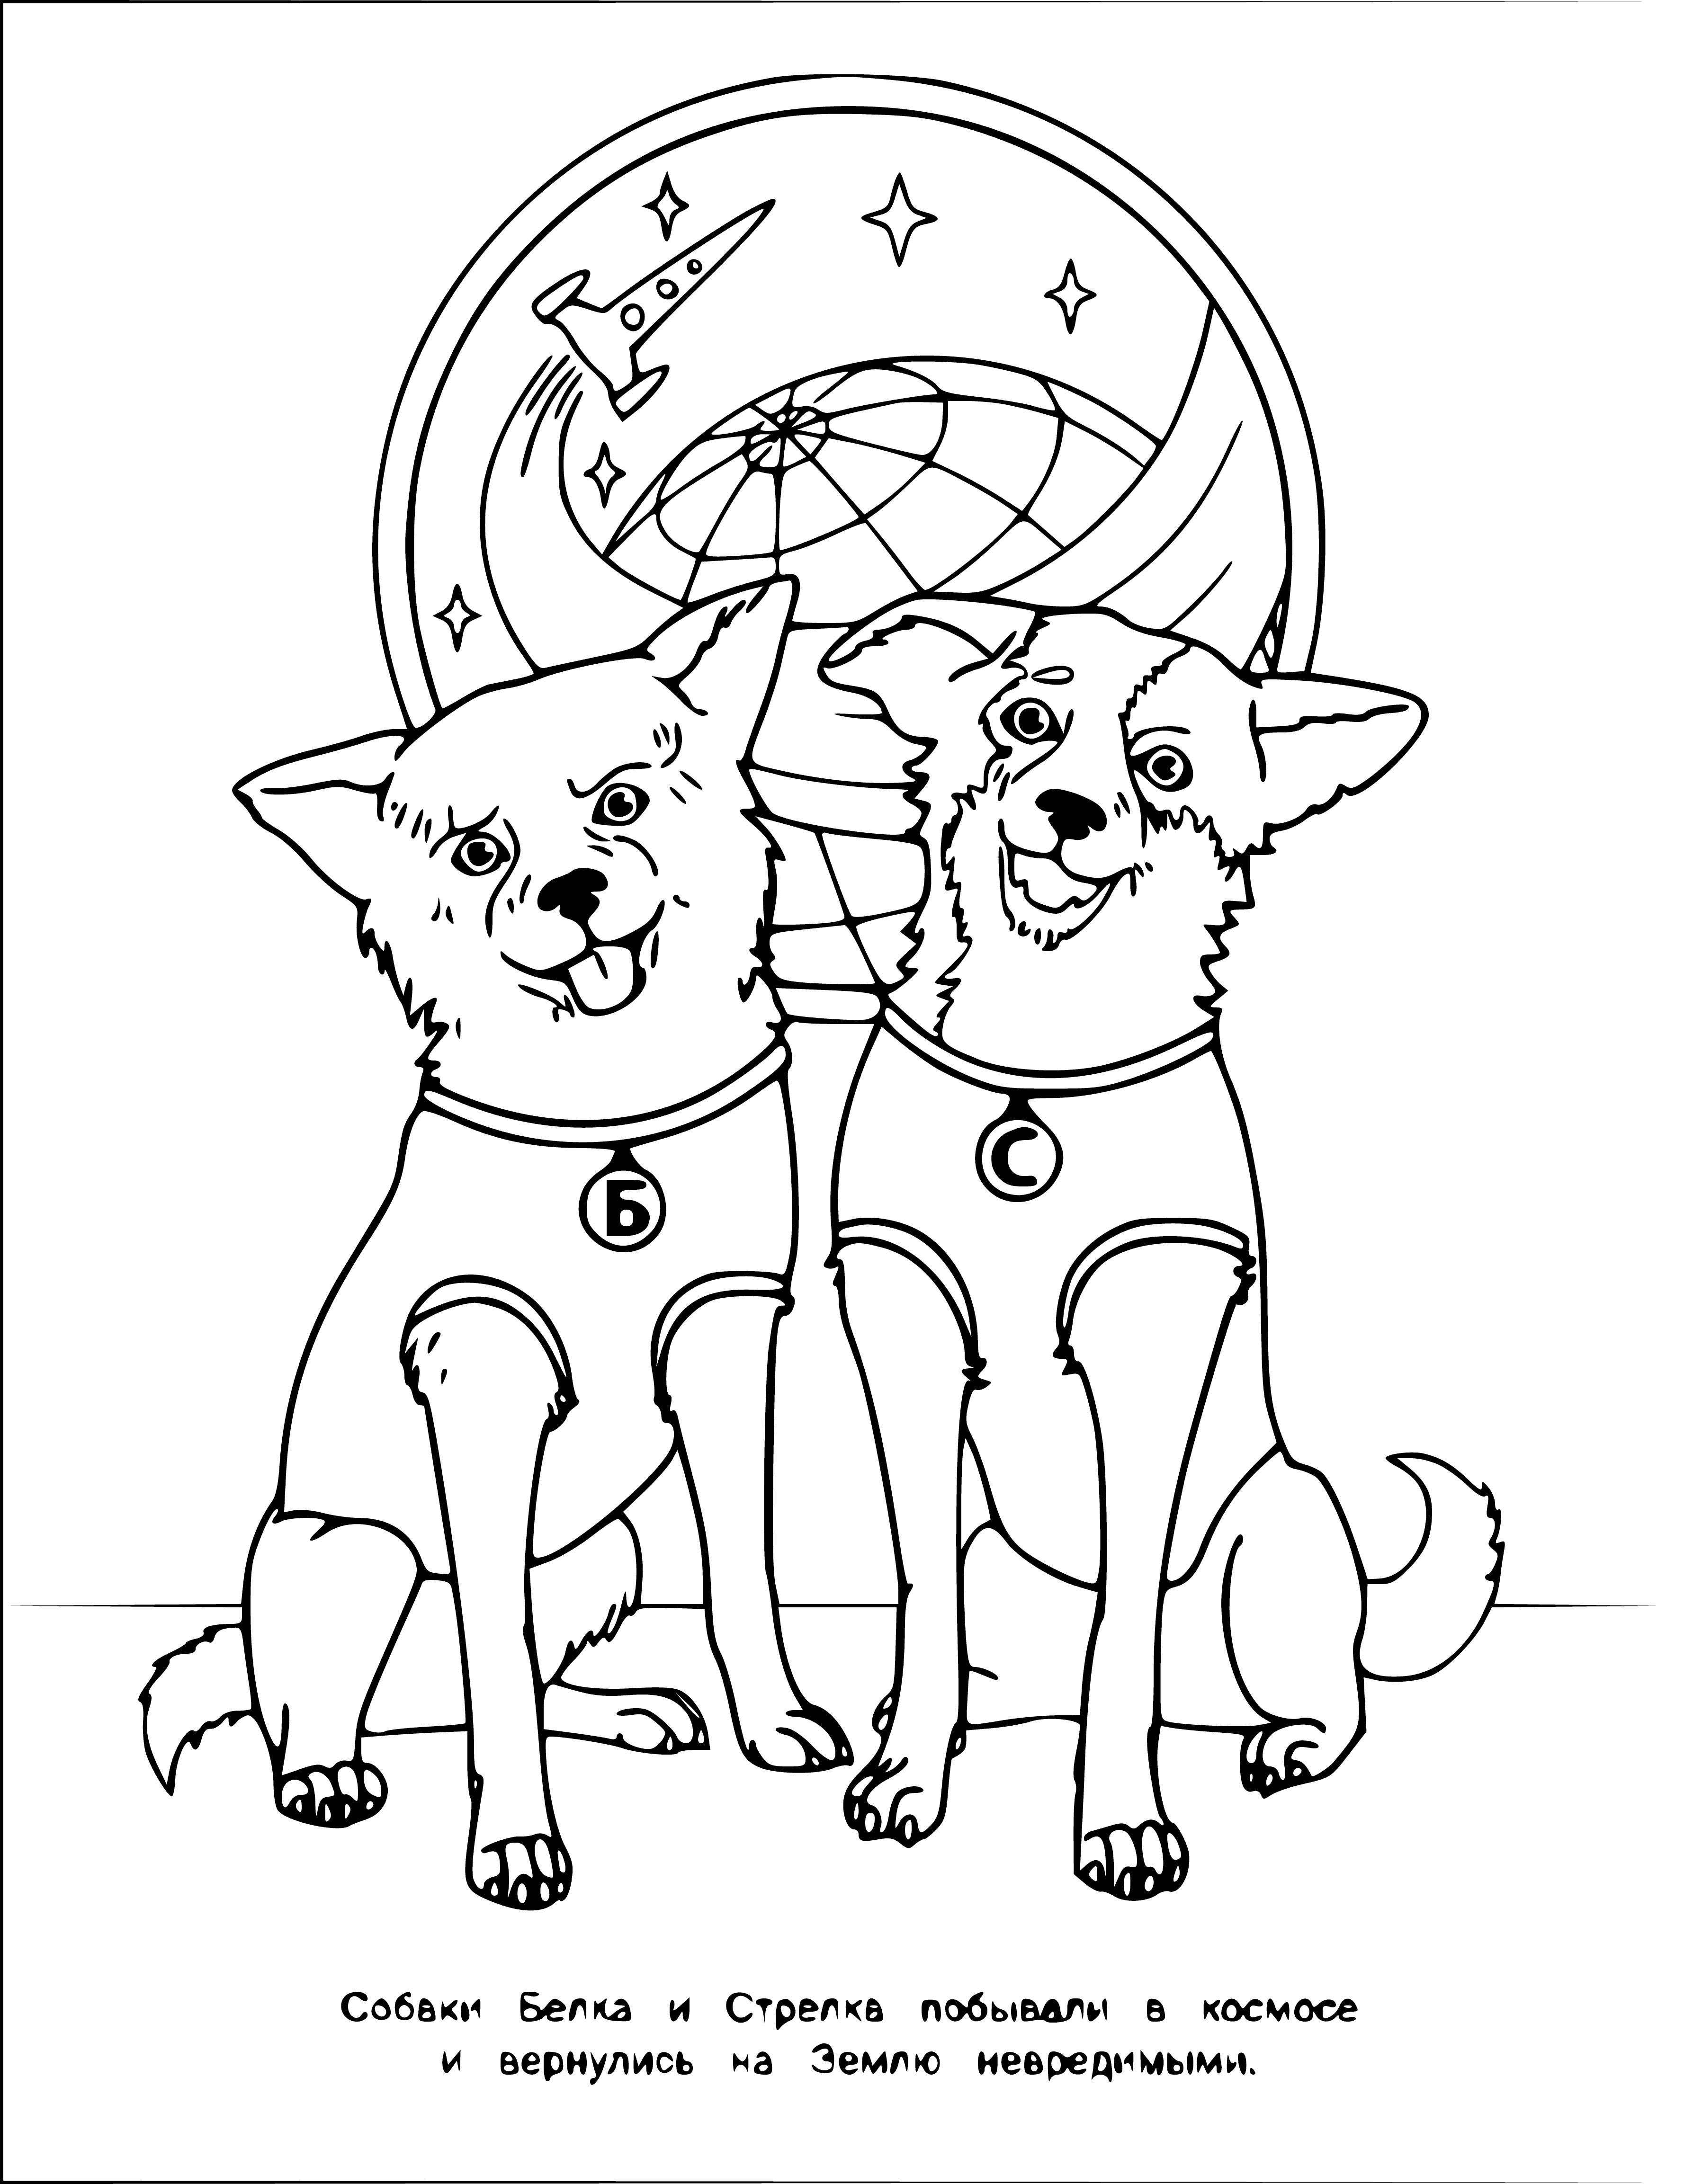 Belka and Strelka coloring page